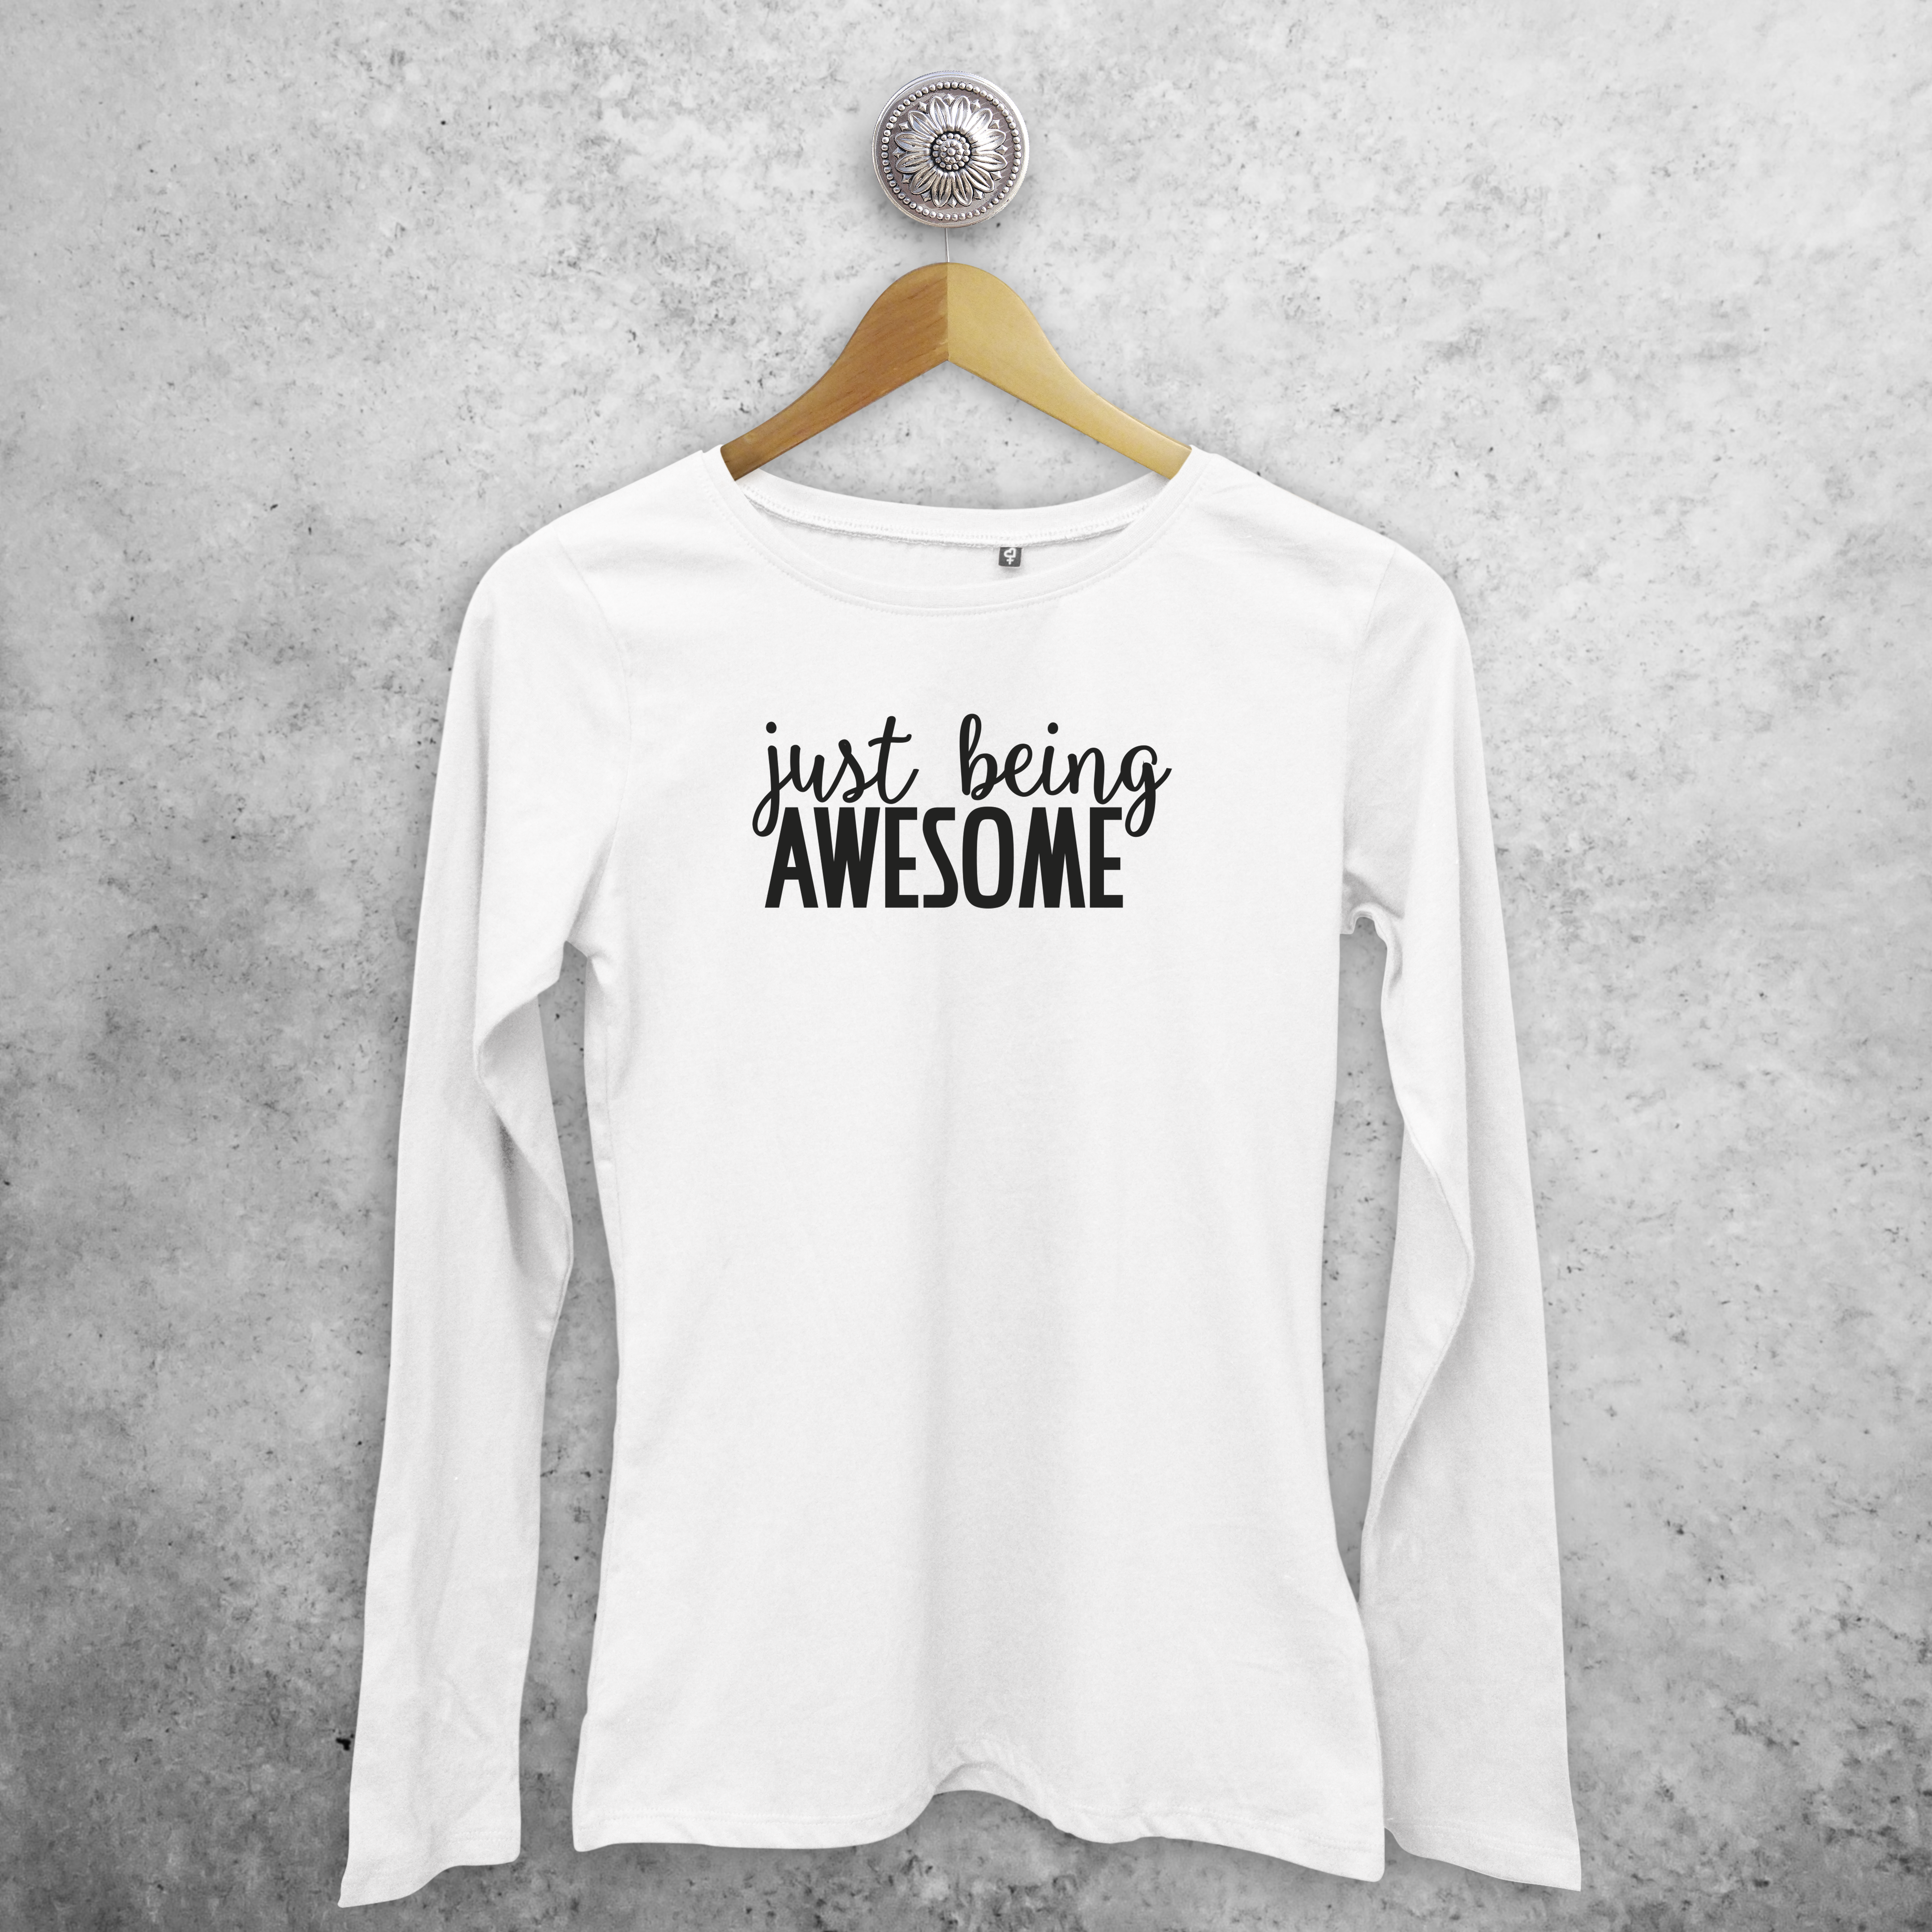 'Just being awesome' adult longsleeve shirt